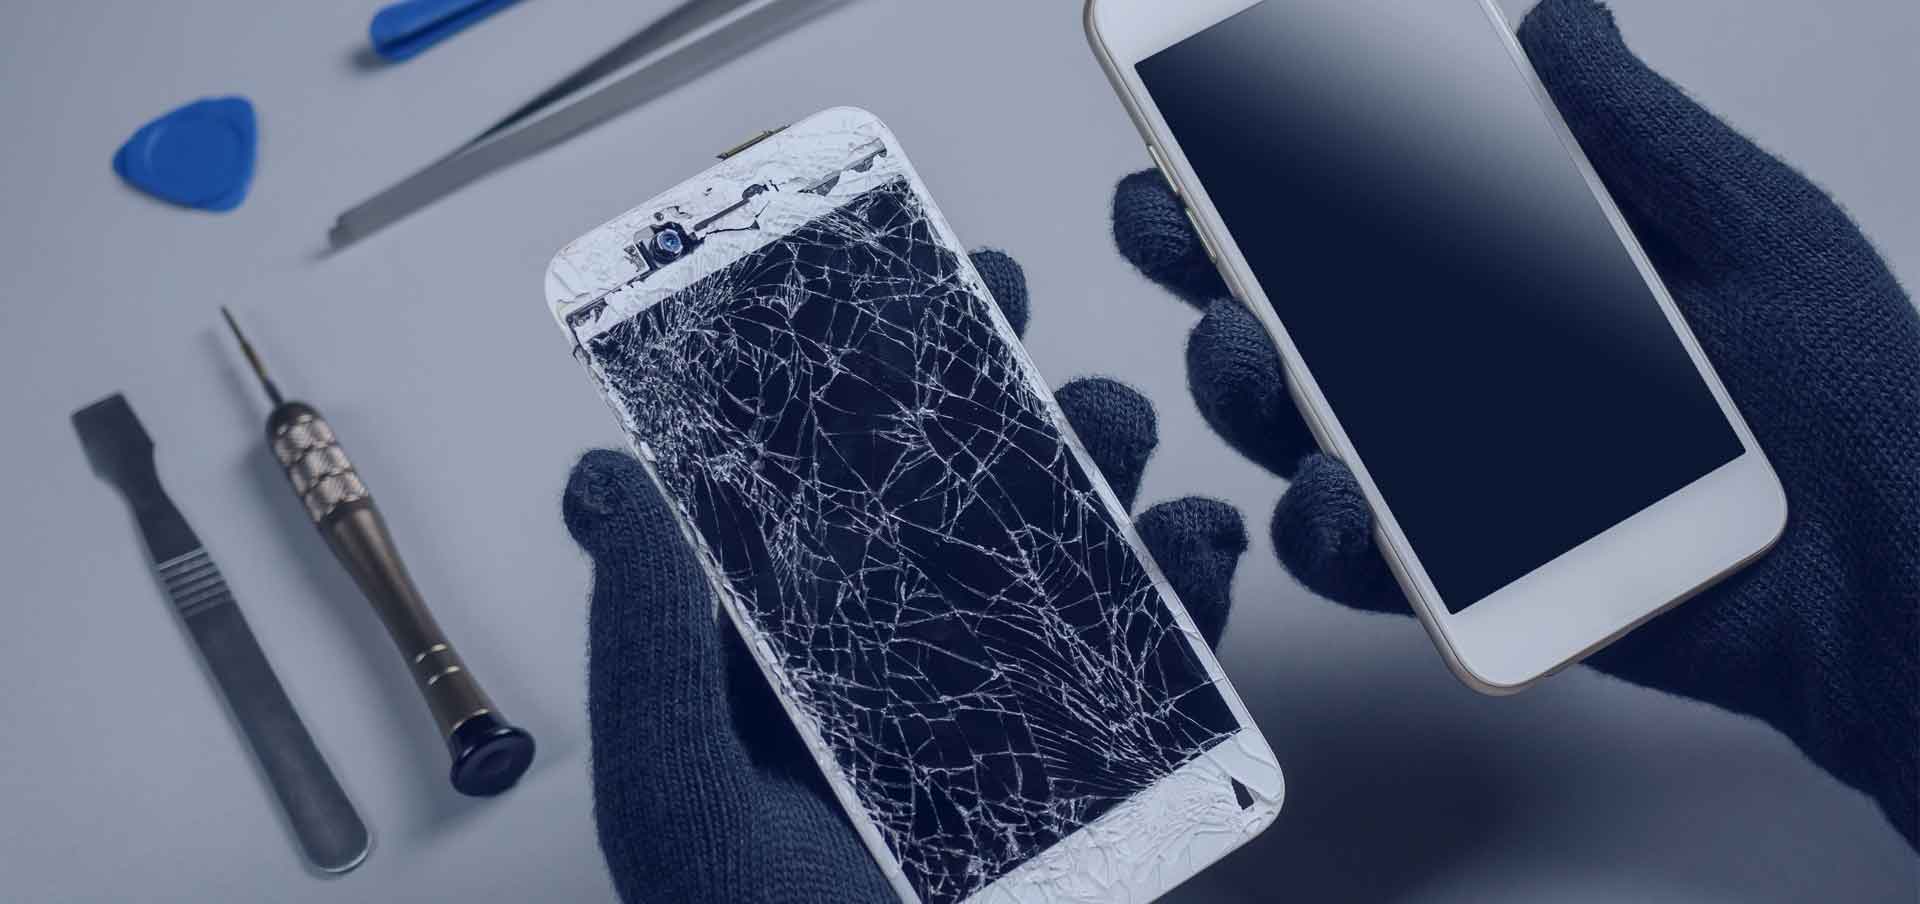 How to get the perfect and experienced Samsung mobile screen repair service?